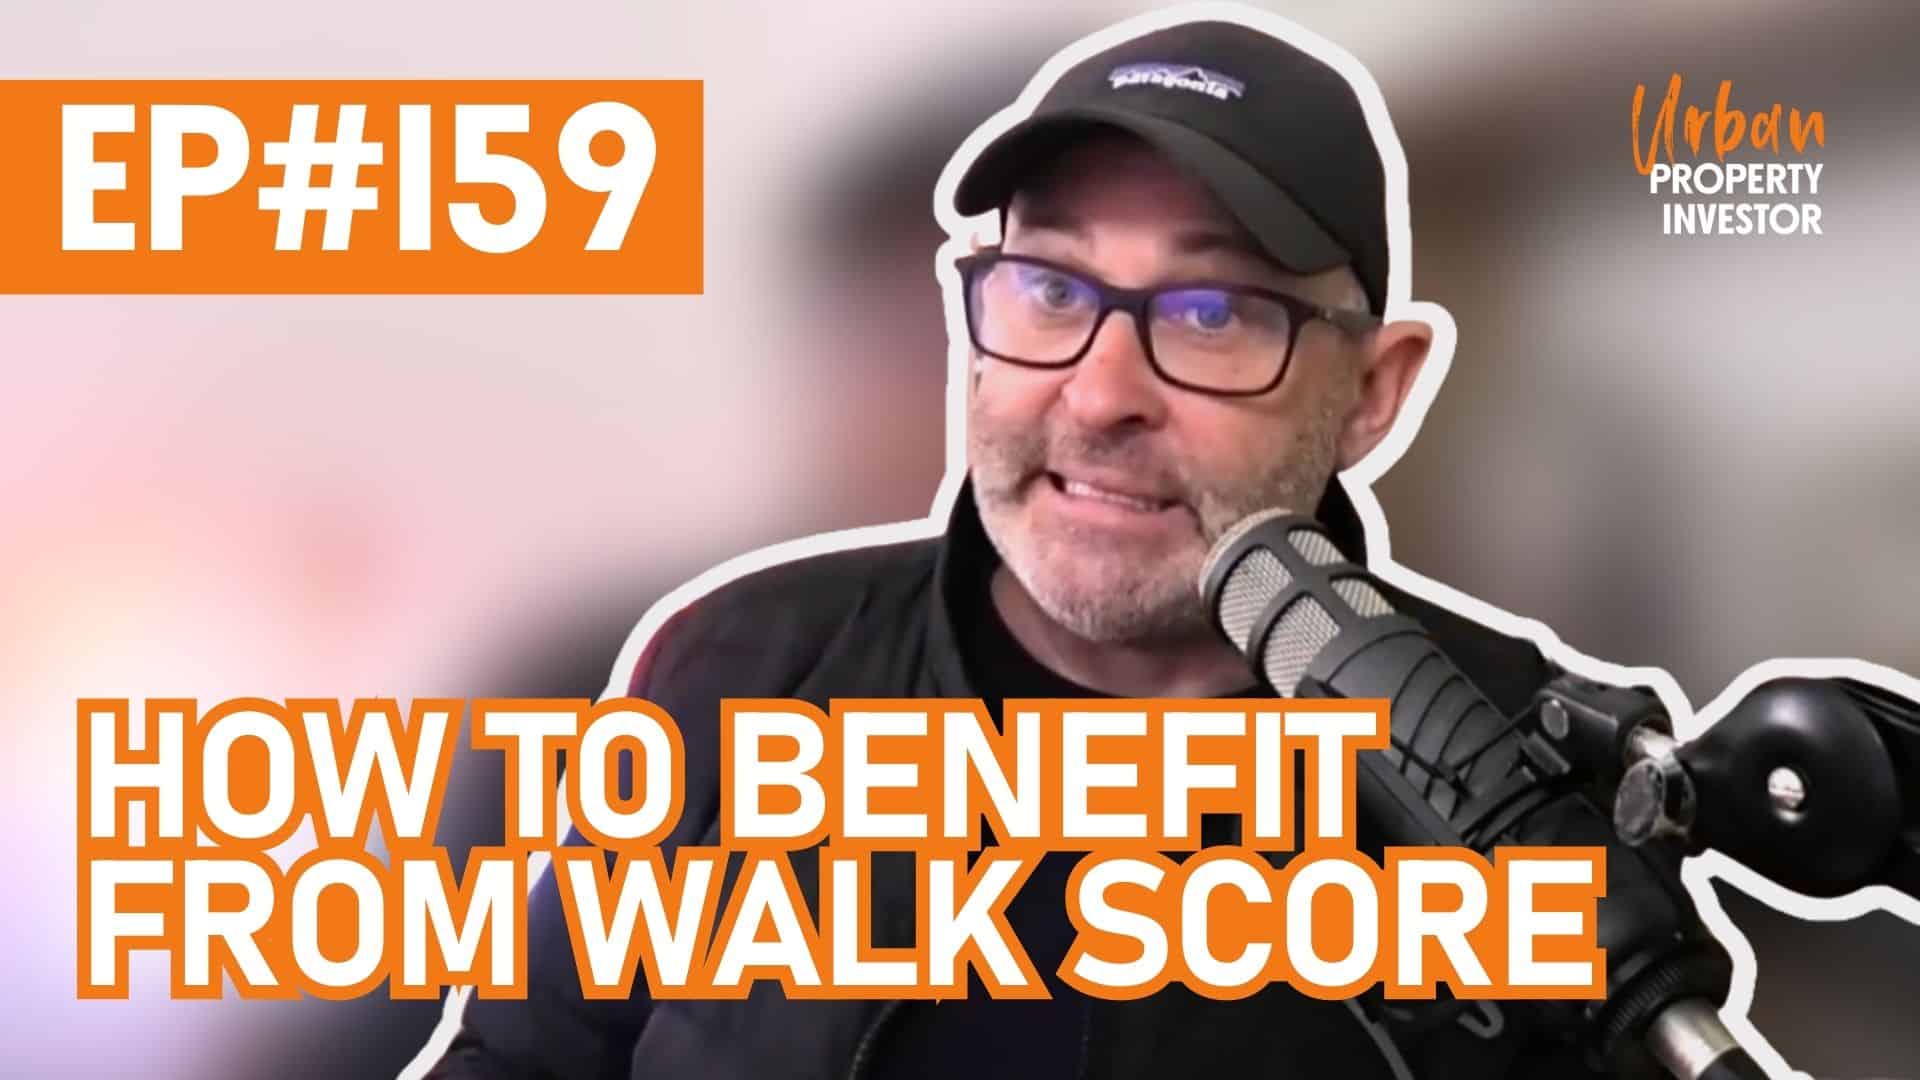 How To Benefit From Walk Score